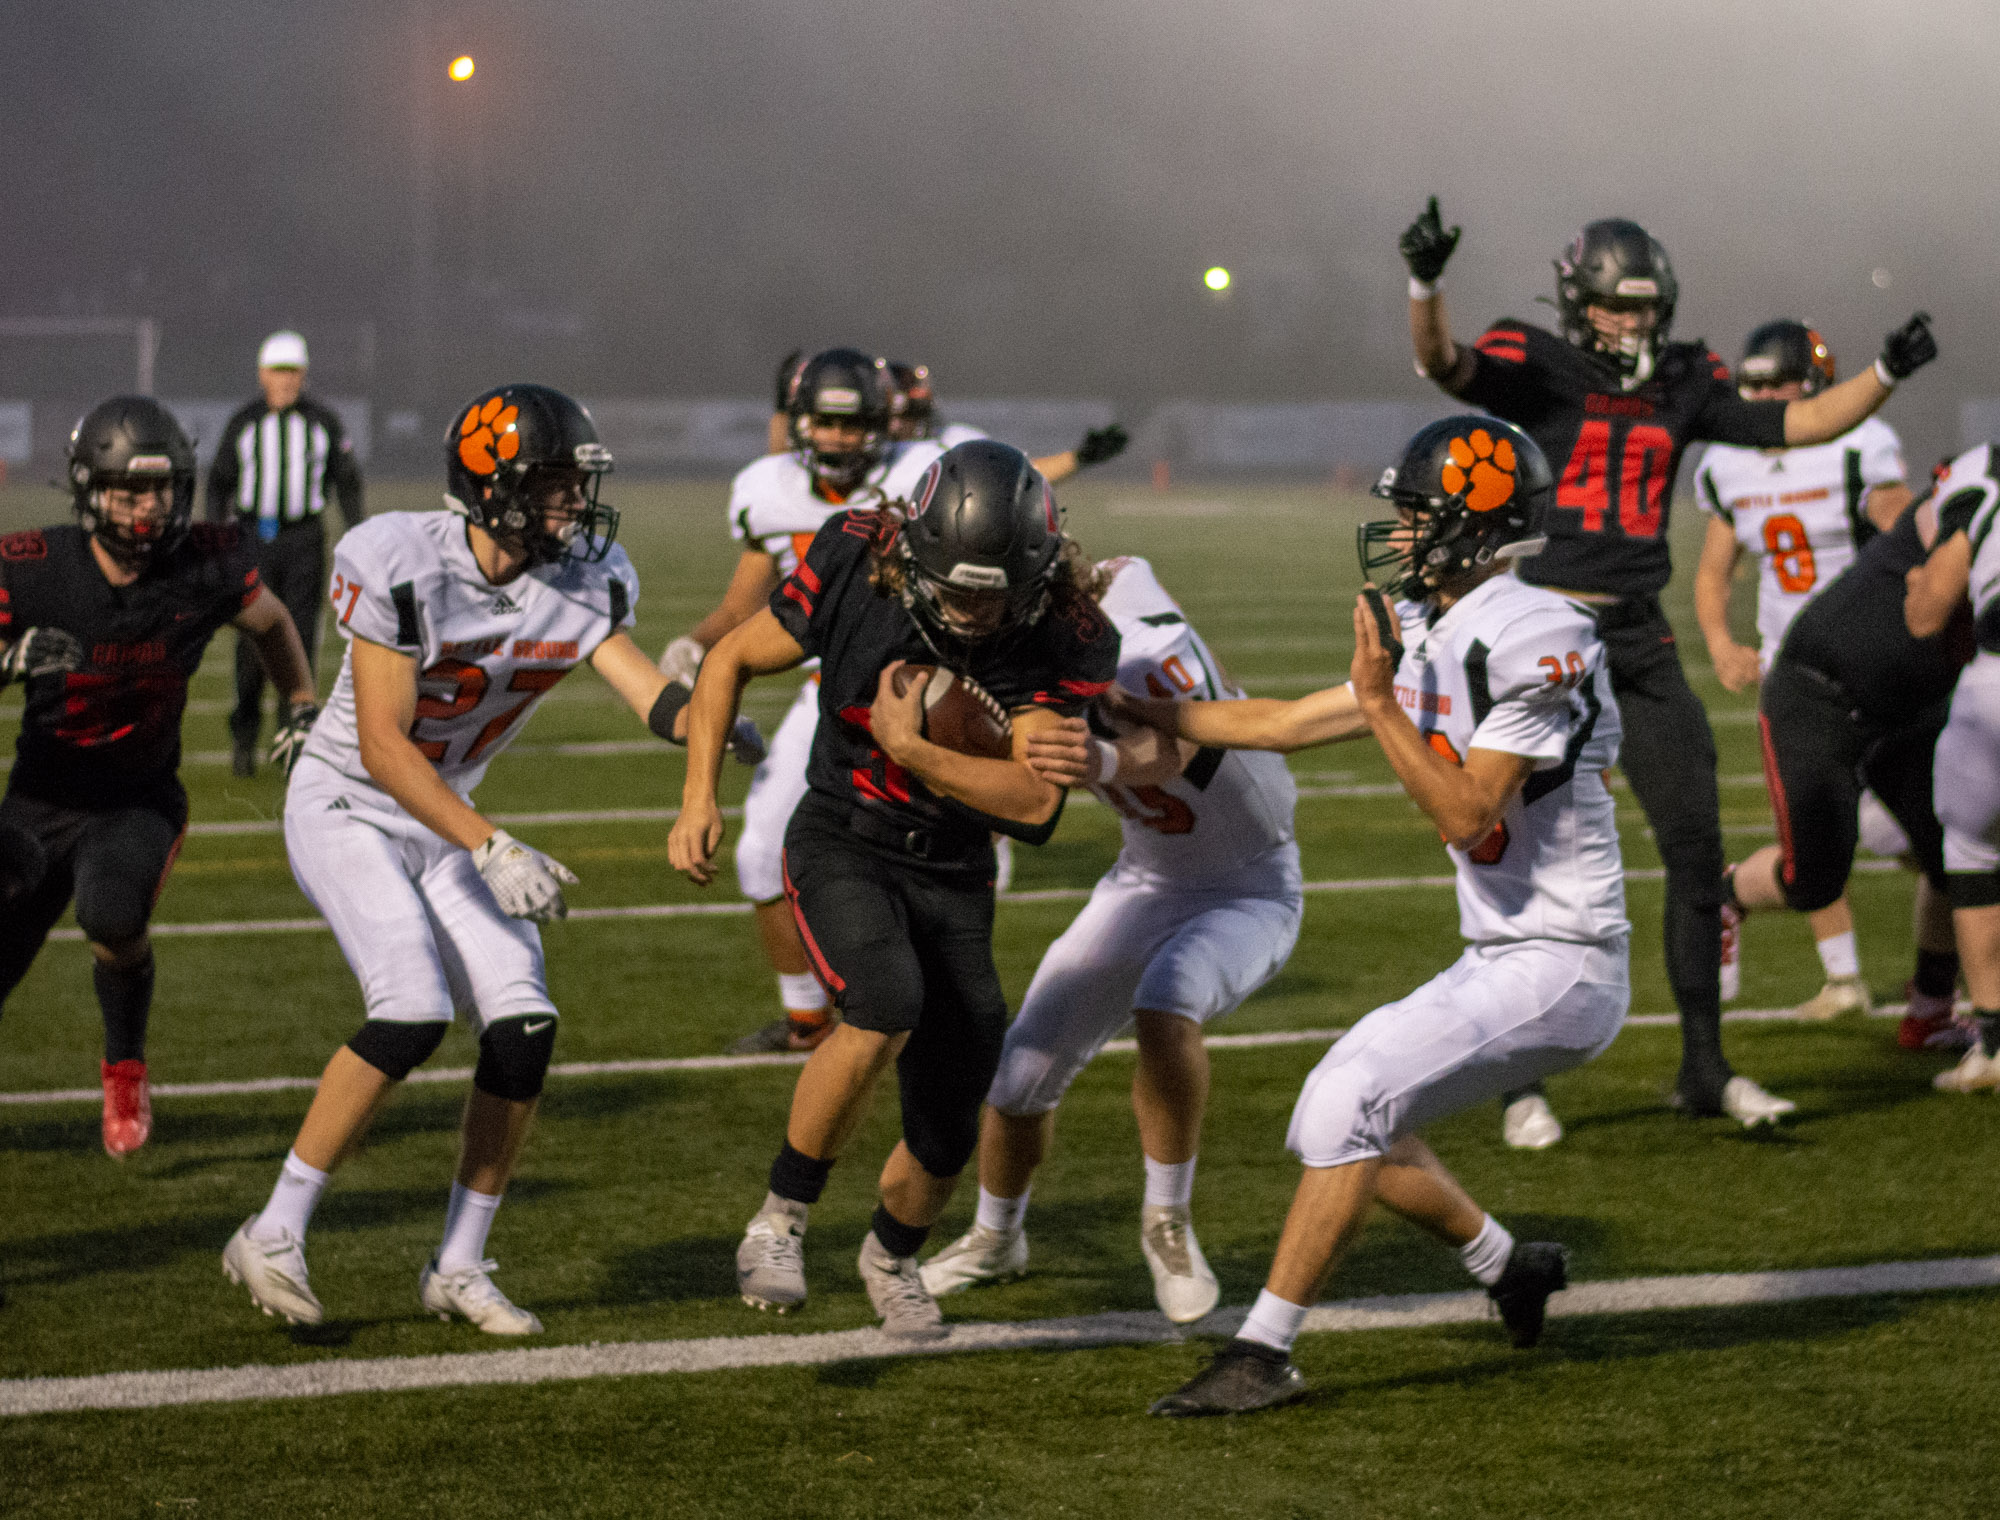 Jon Schultz, center, beats three Battle Ground defenders into the end zone for a game-opening score in a 4A Greater St. Helens League football game on Thursday, Sept. 30, 2021, at Doc Harris Stadium in Camas. Camas beat Battle Ground 56-6.